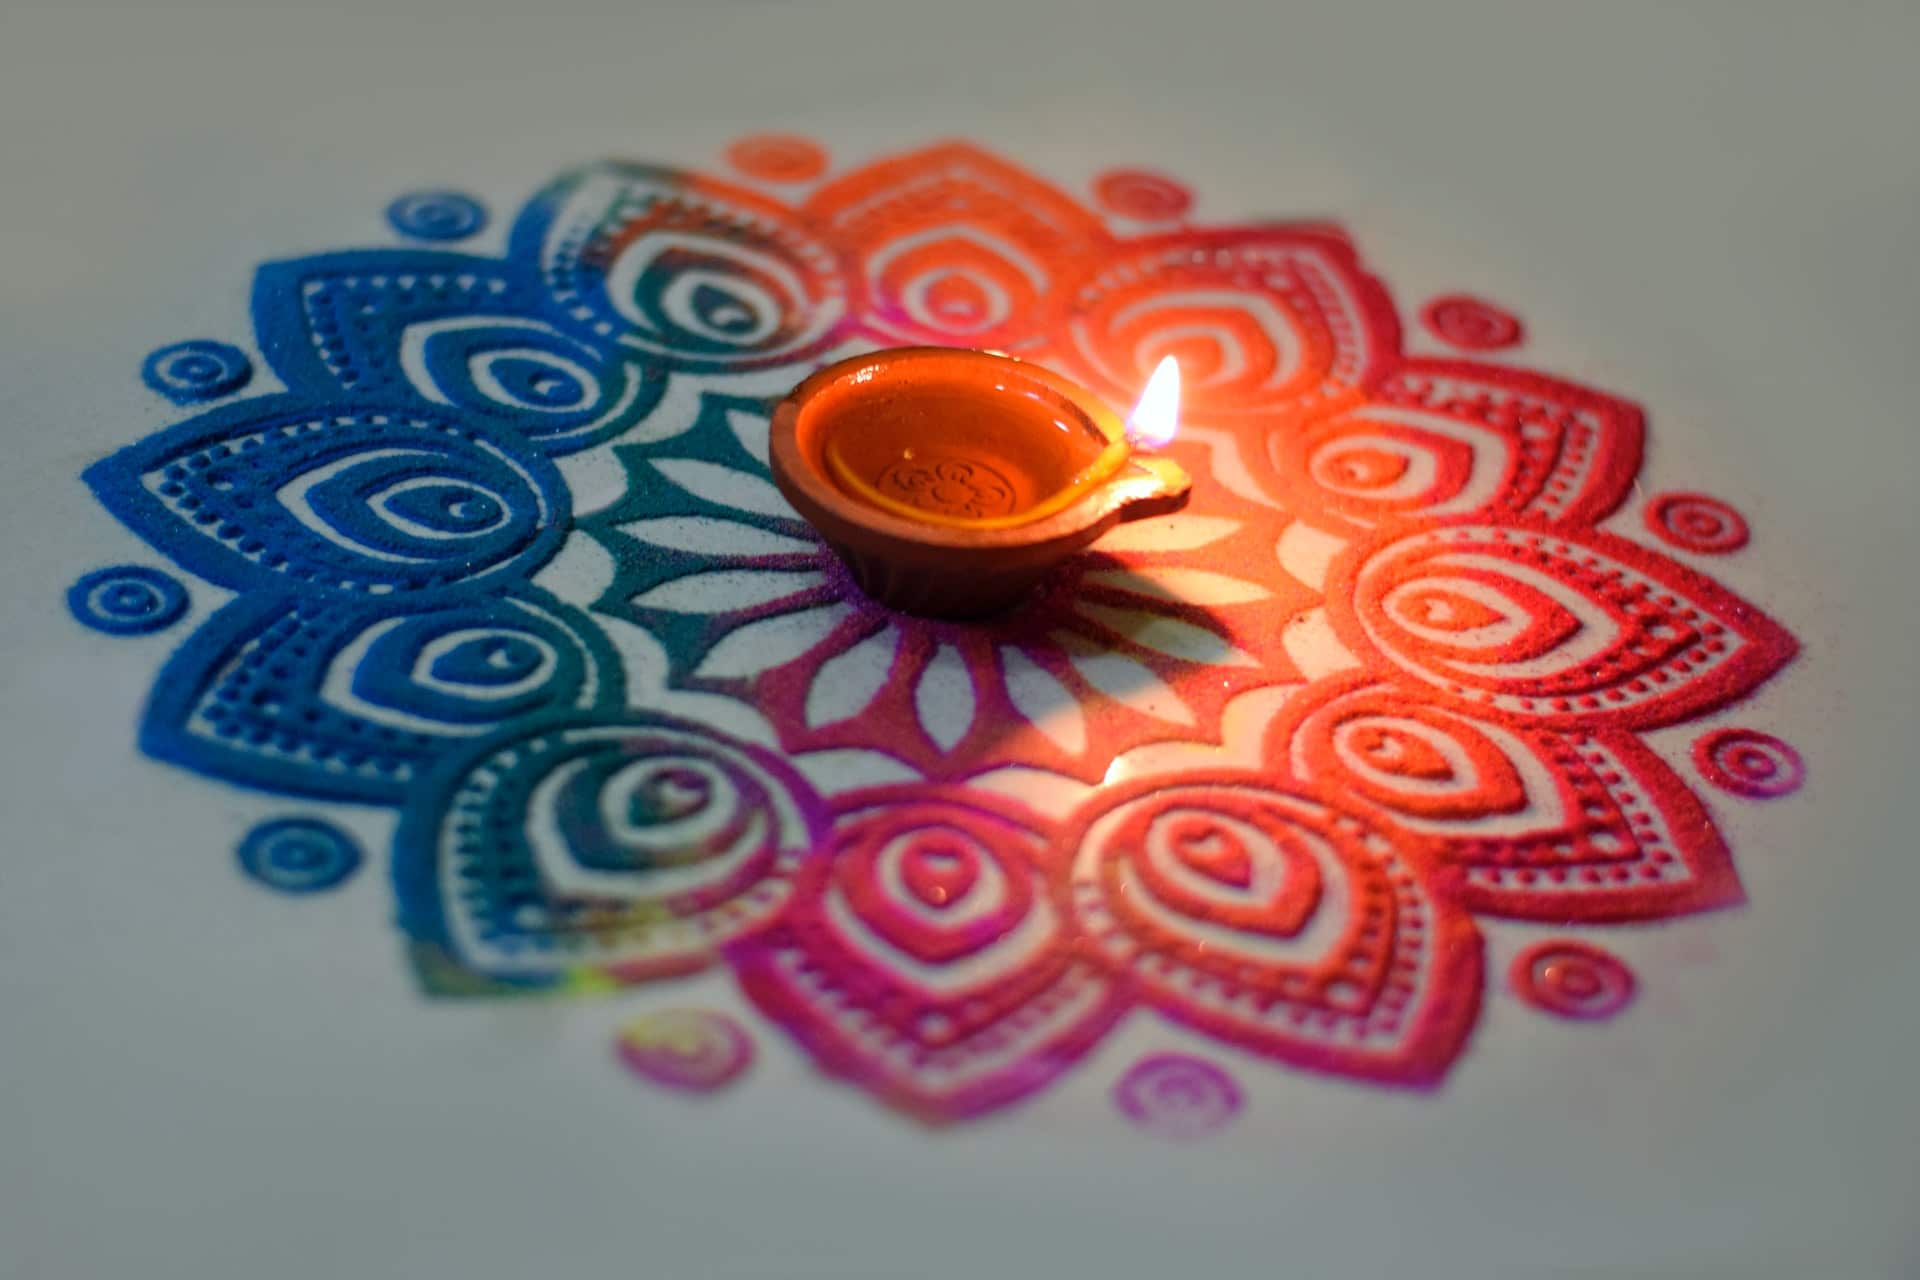 jyoti singh SOXx3b51s1k unsplash - Best Diwali Wishes for Brother and Sister of 2021